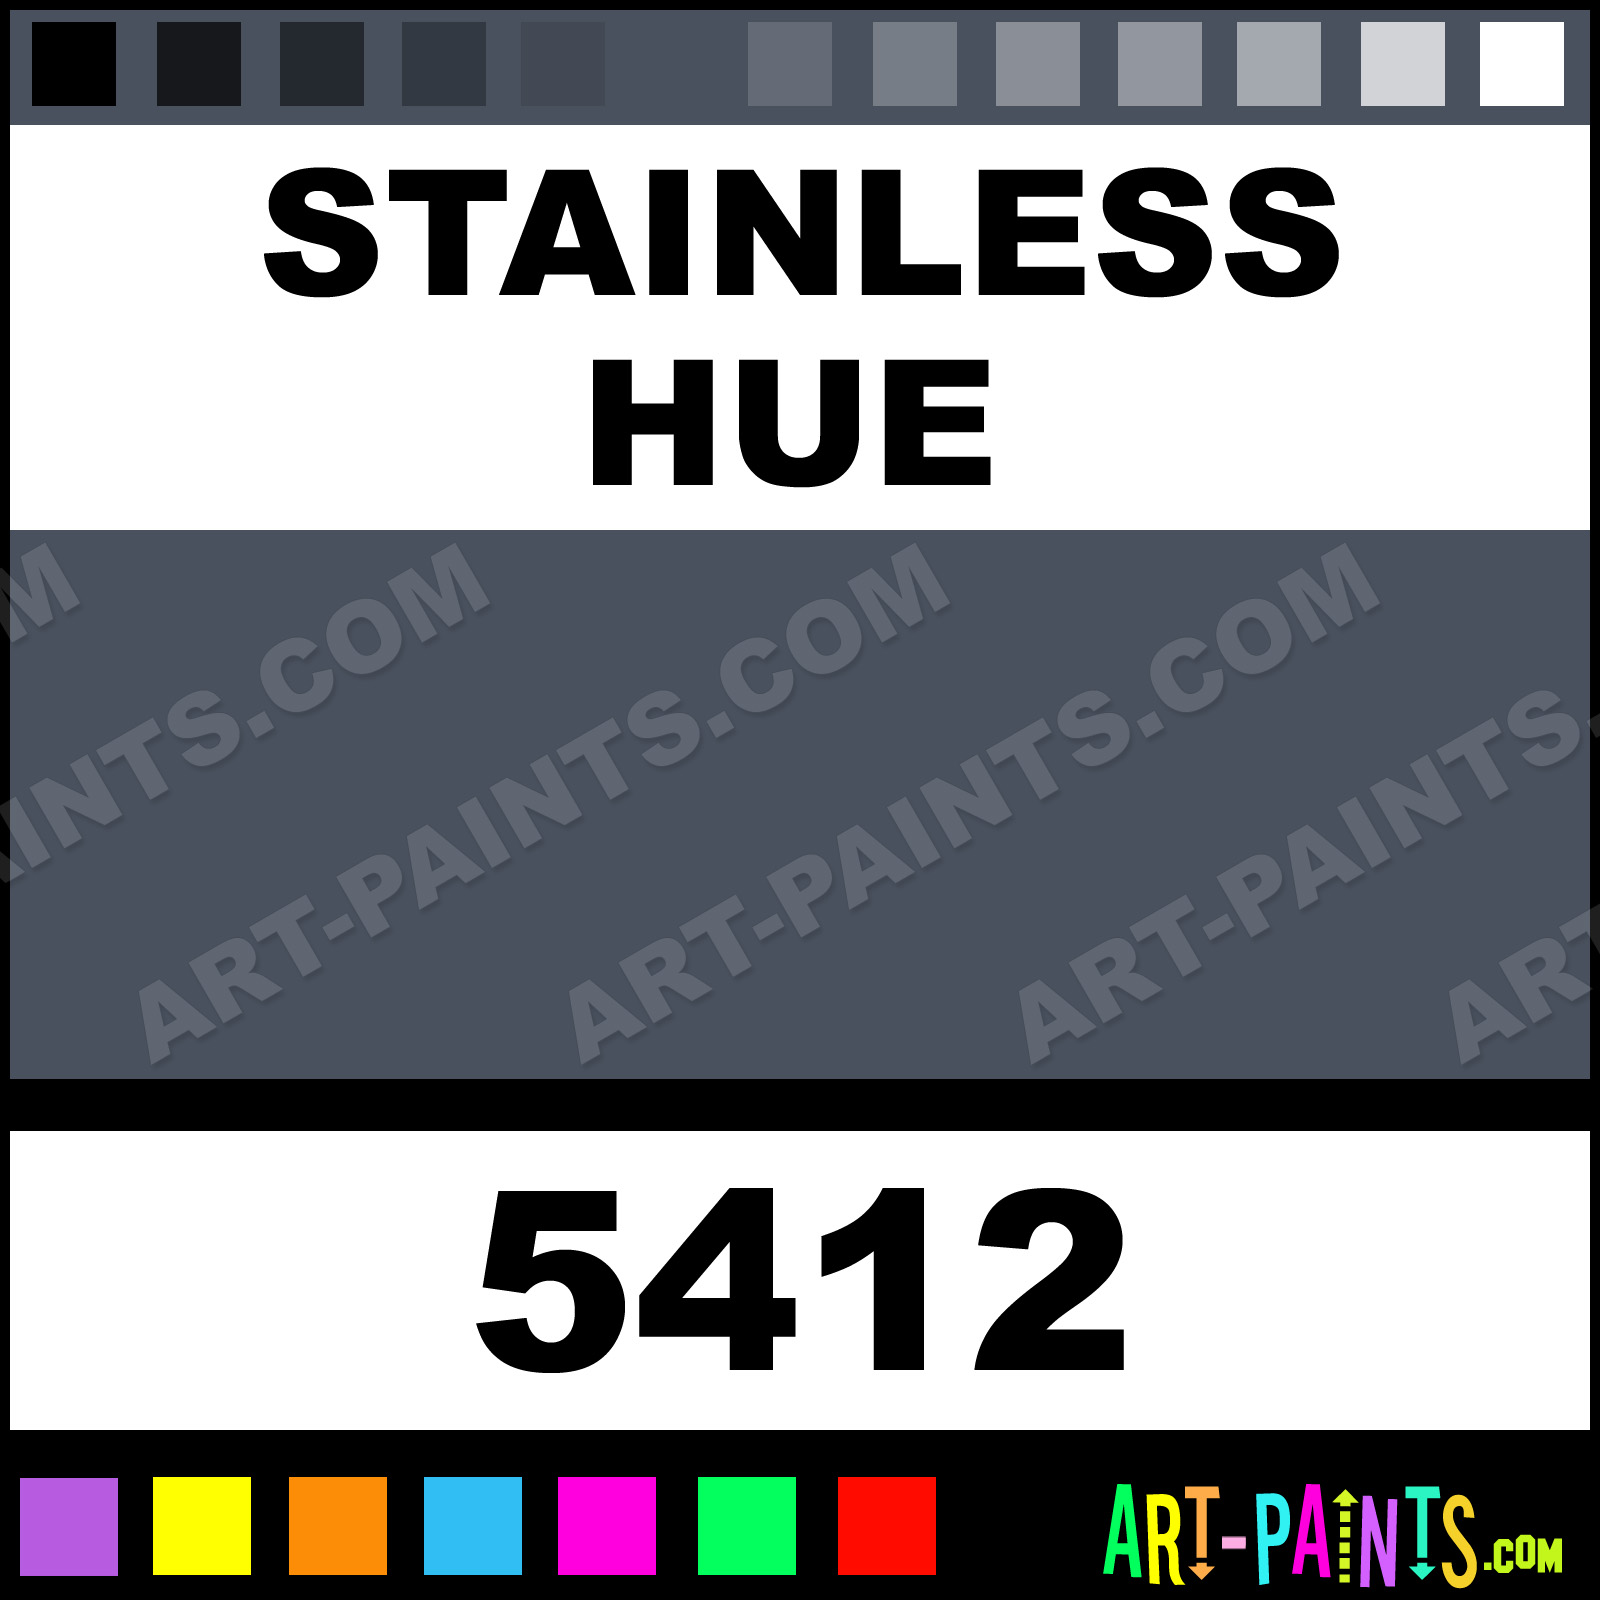 stainless paint